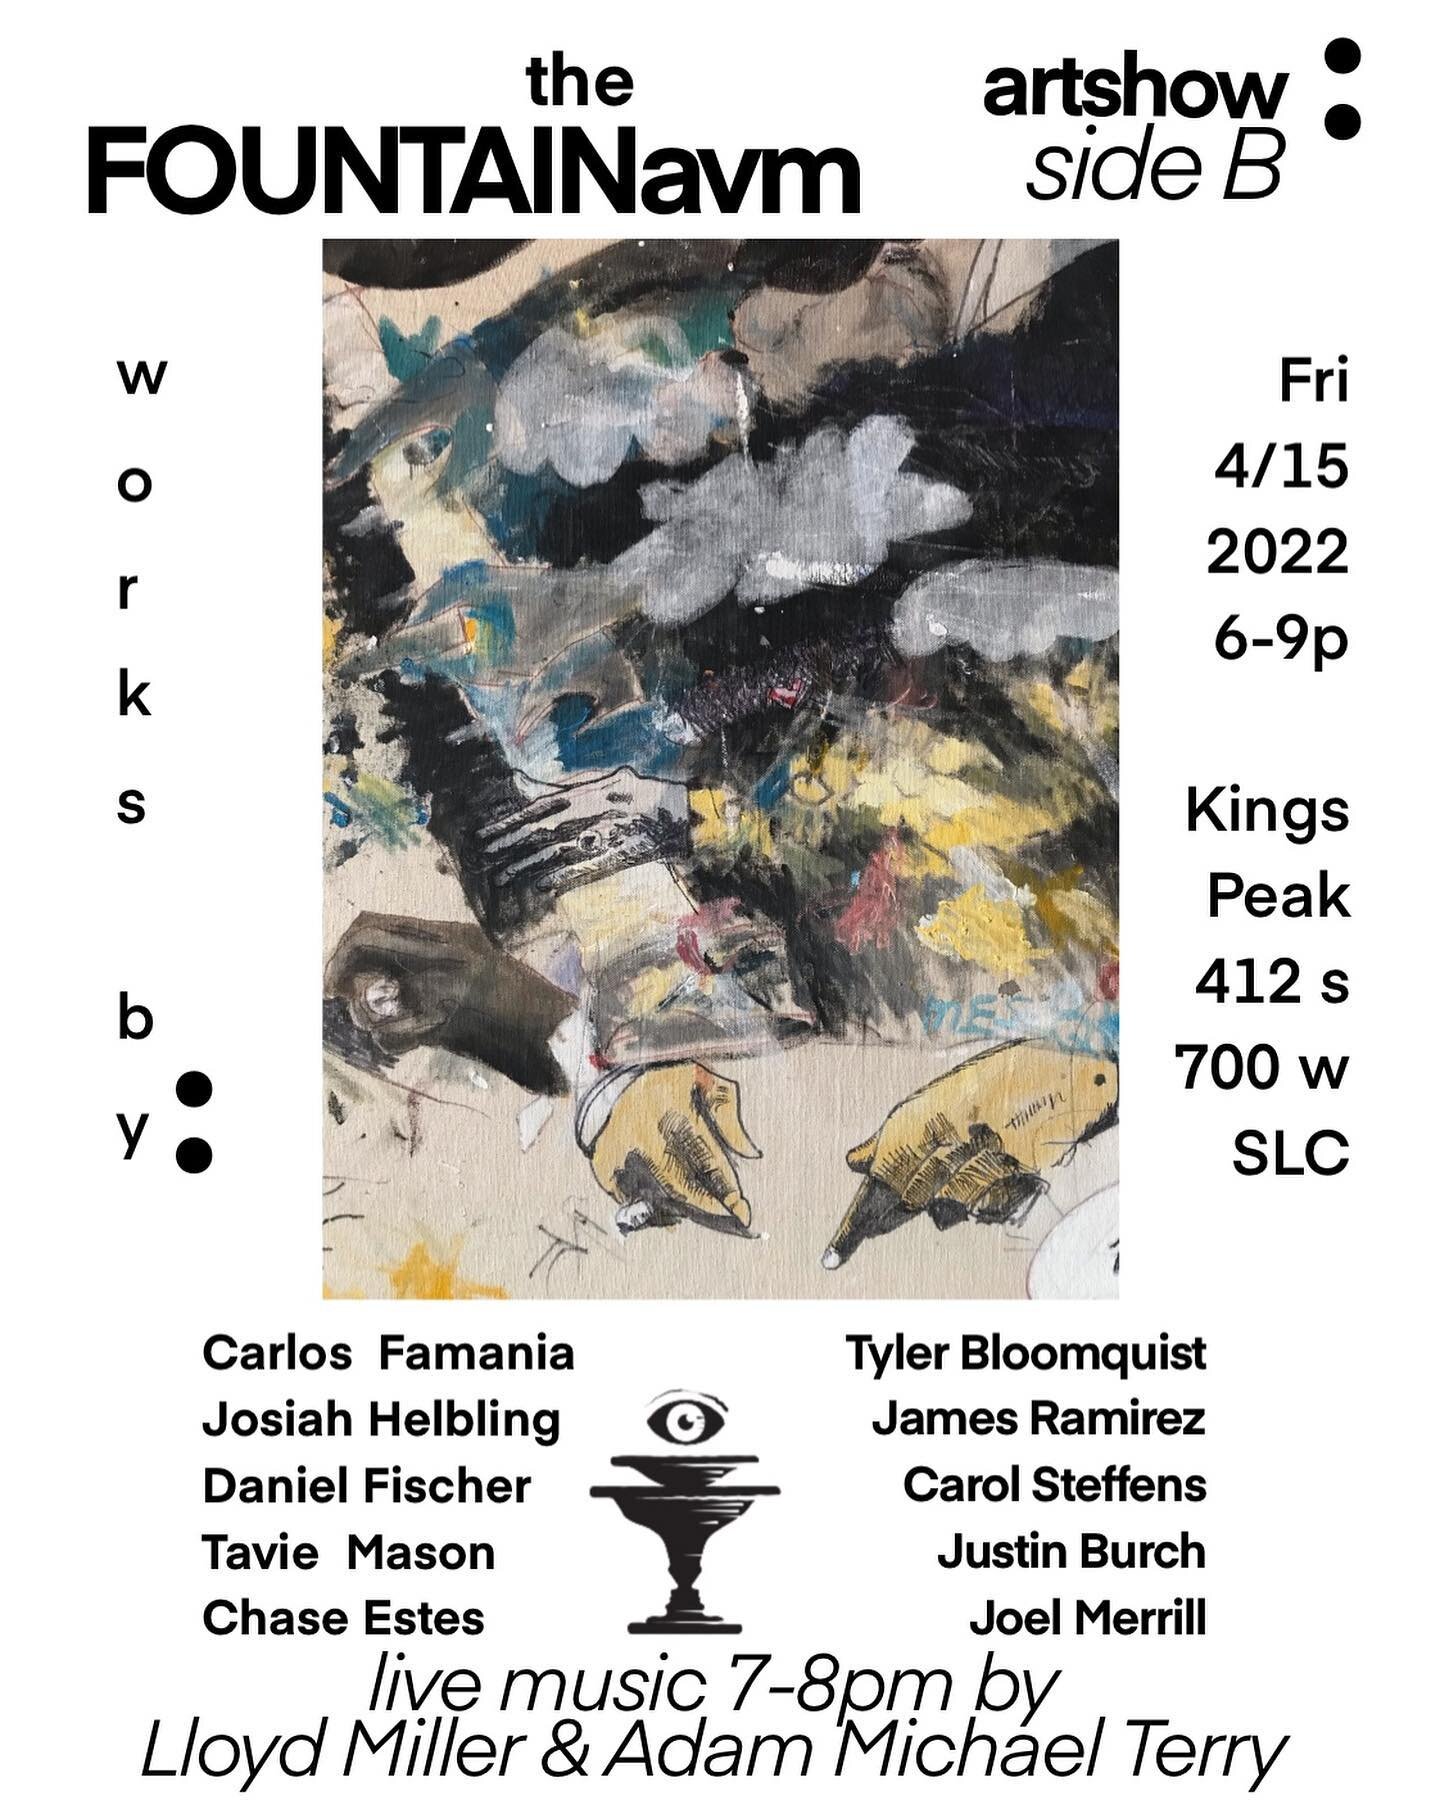 This Friday inside @kingspeakcoffeeroasters we at @fountainavm are curating a &ldquo;side B &ldquo; to our artshow of last month. We will be adding new works from are artists as well as reshowing several works from last show in case you missed it. Ou